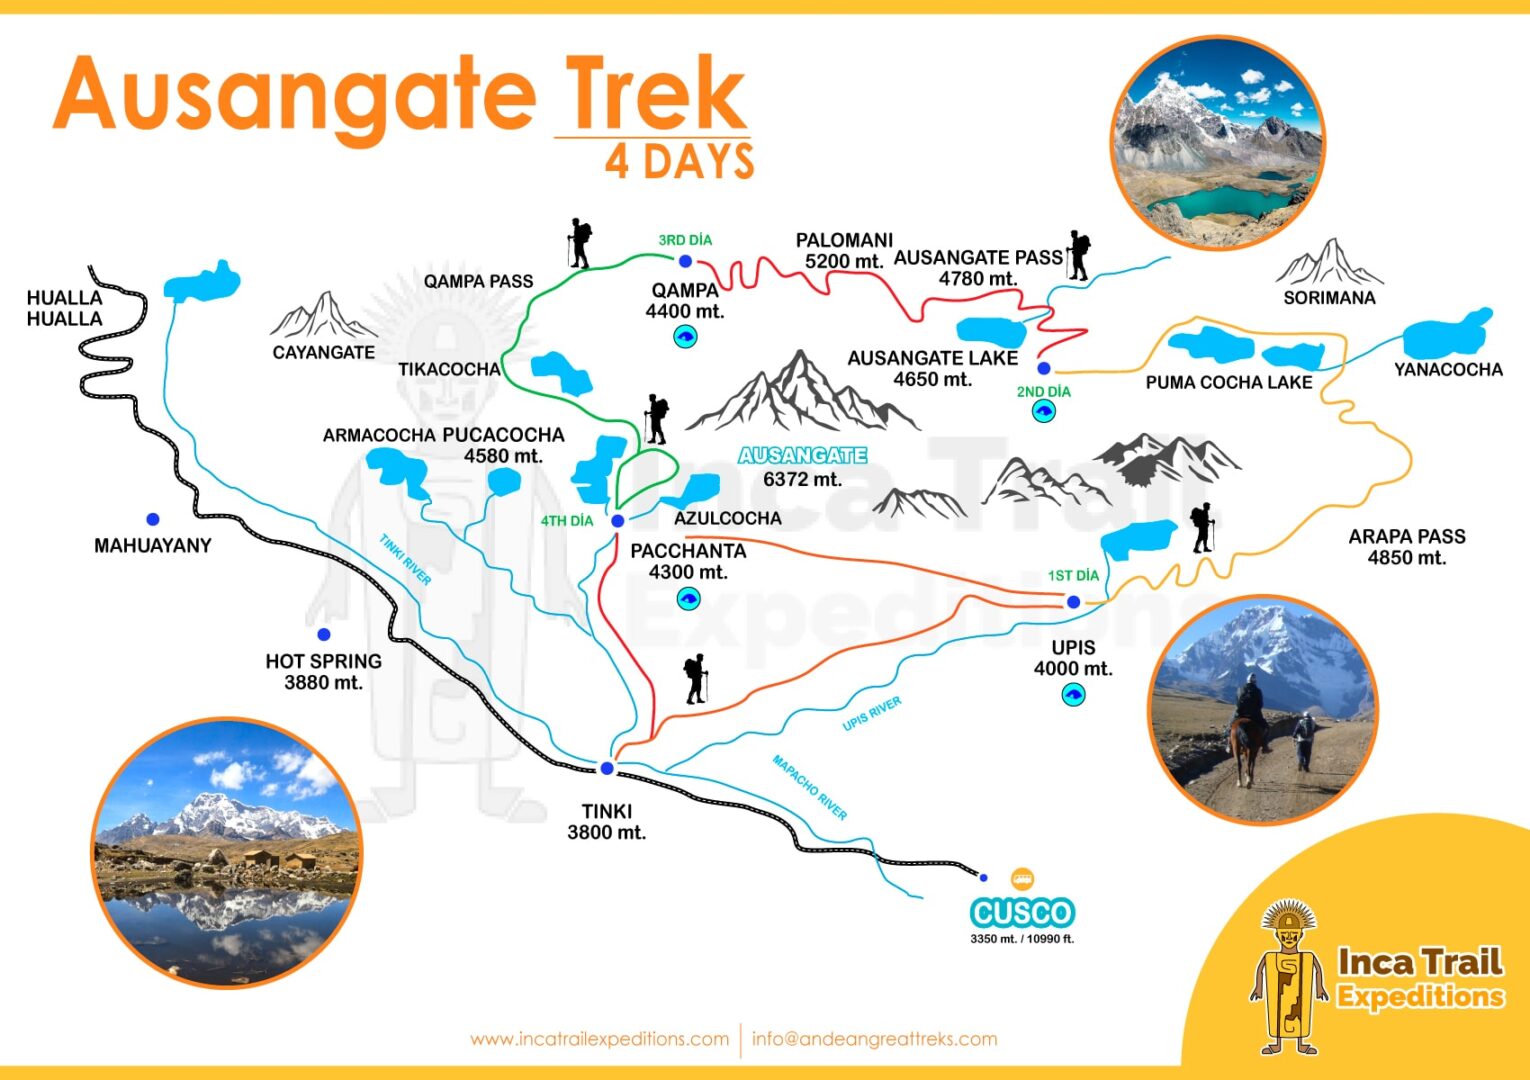 AUSANGATE-TREK-4-DAYS-BY-INCA-TRAIL-EXPEDITIONS